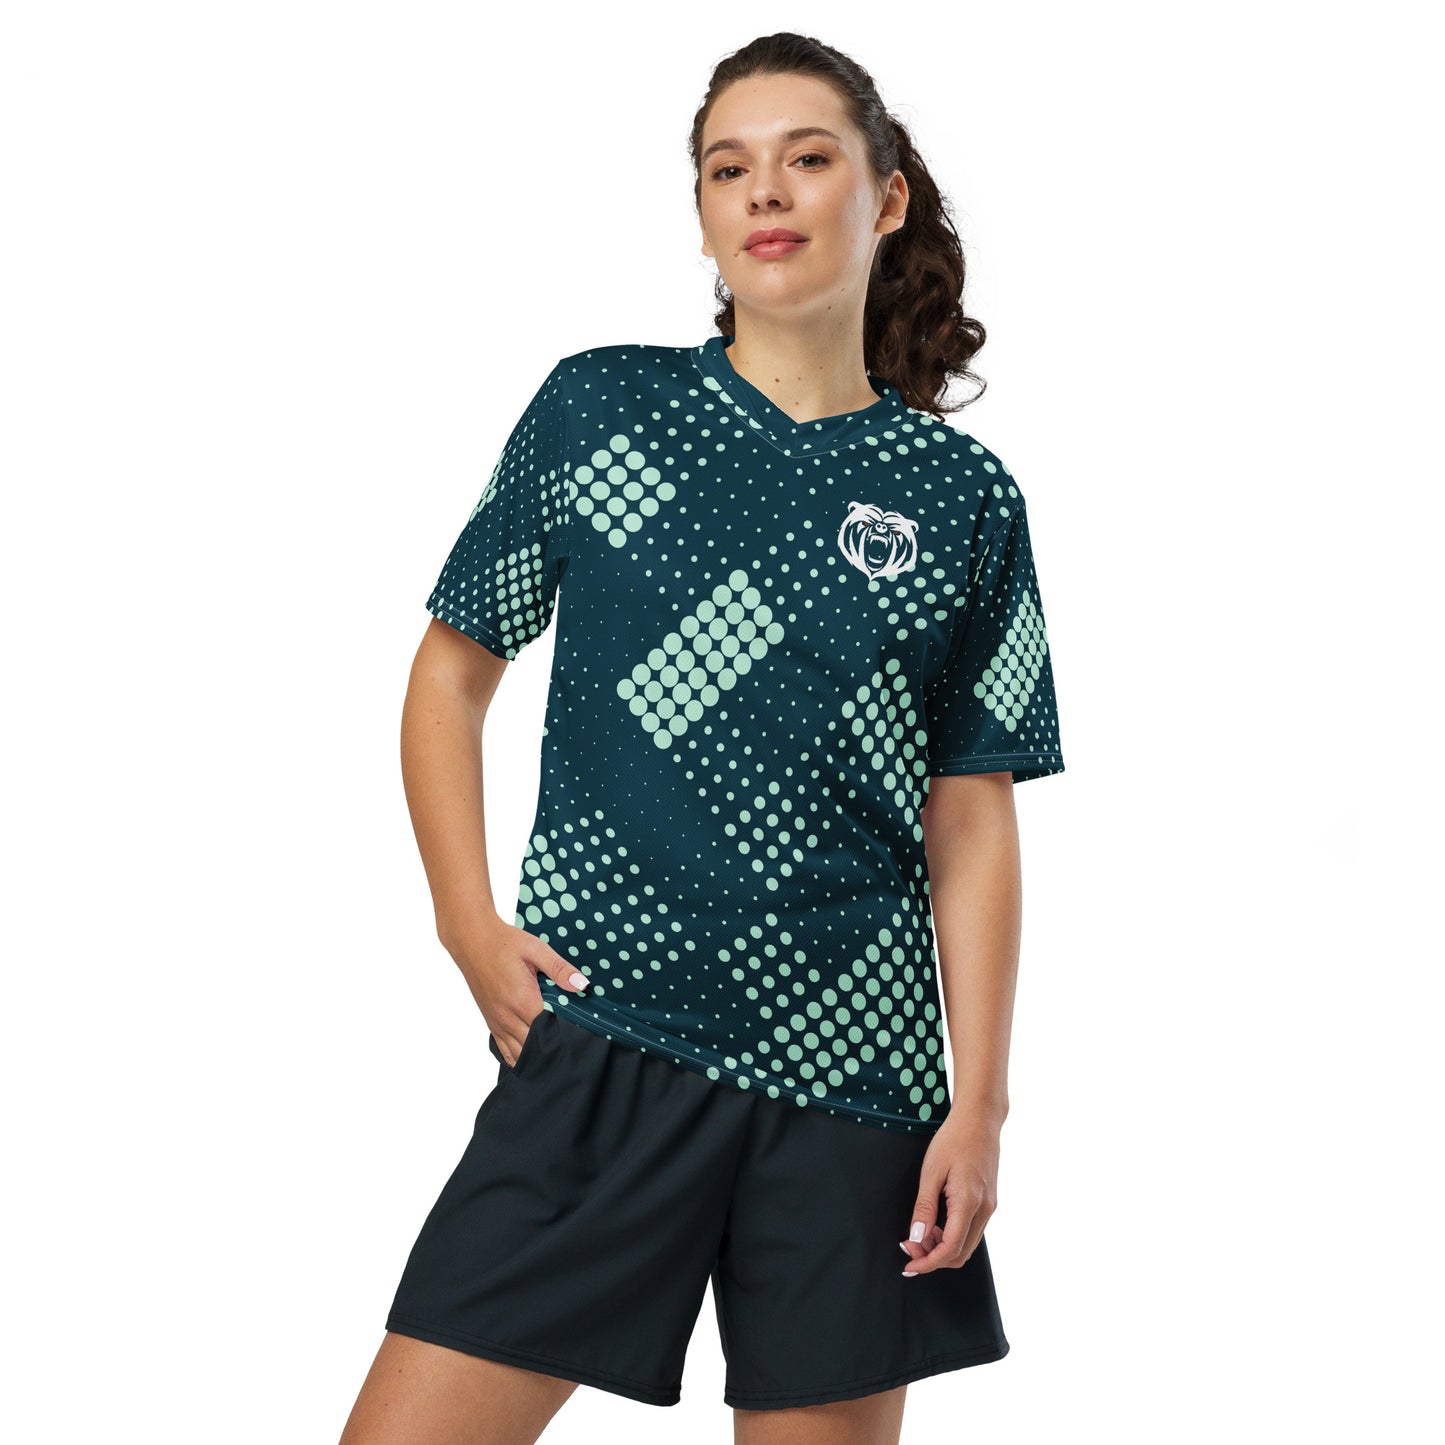 Recycled Unisex Jersey - Green